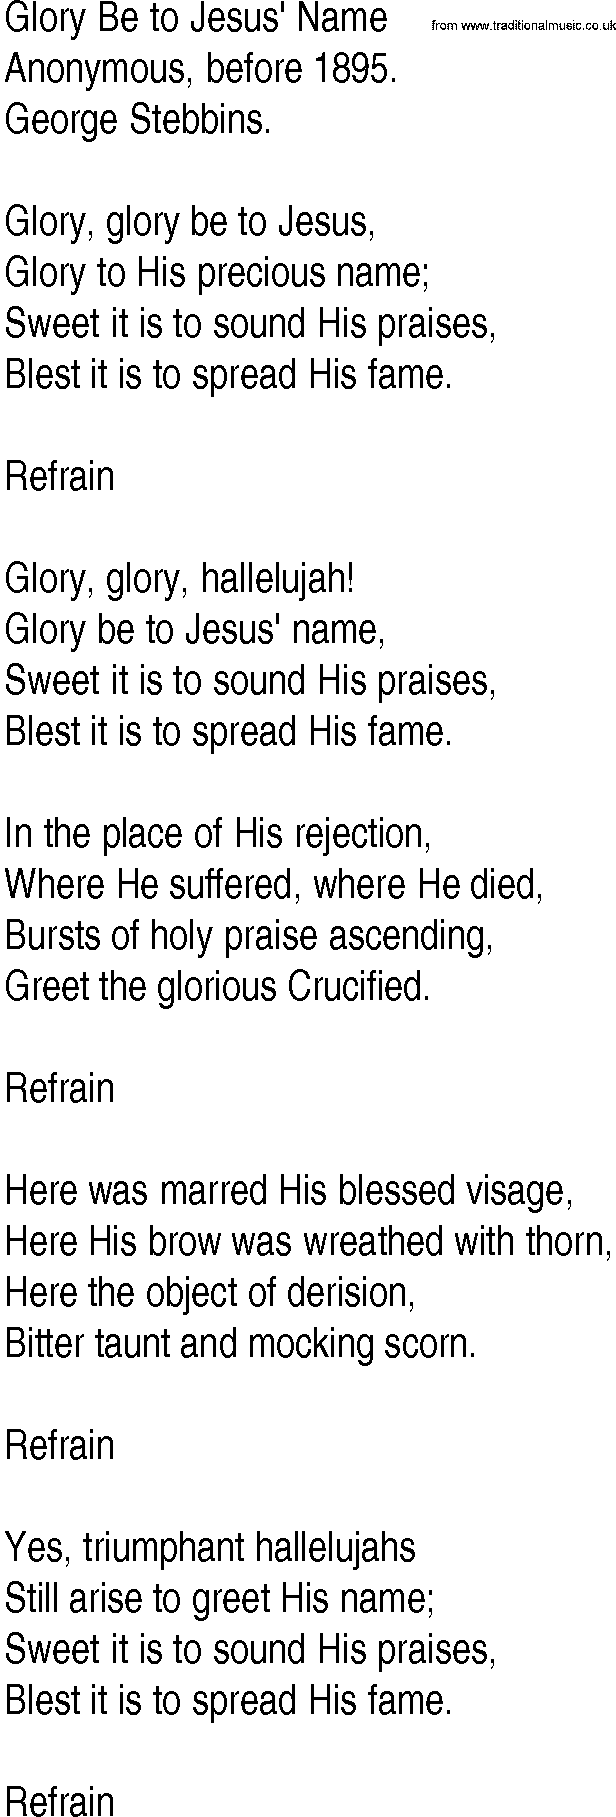 Hymn and Gospel Song: Glory Be to Jesus' Name by Anonymous before lyrics